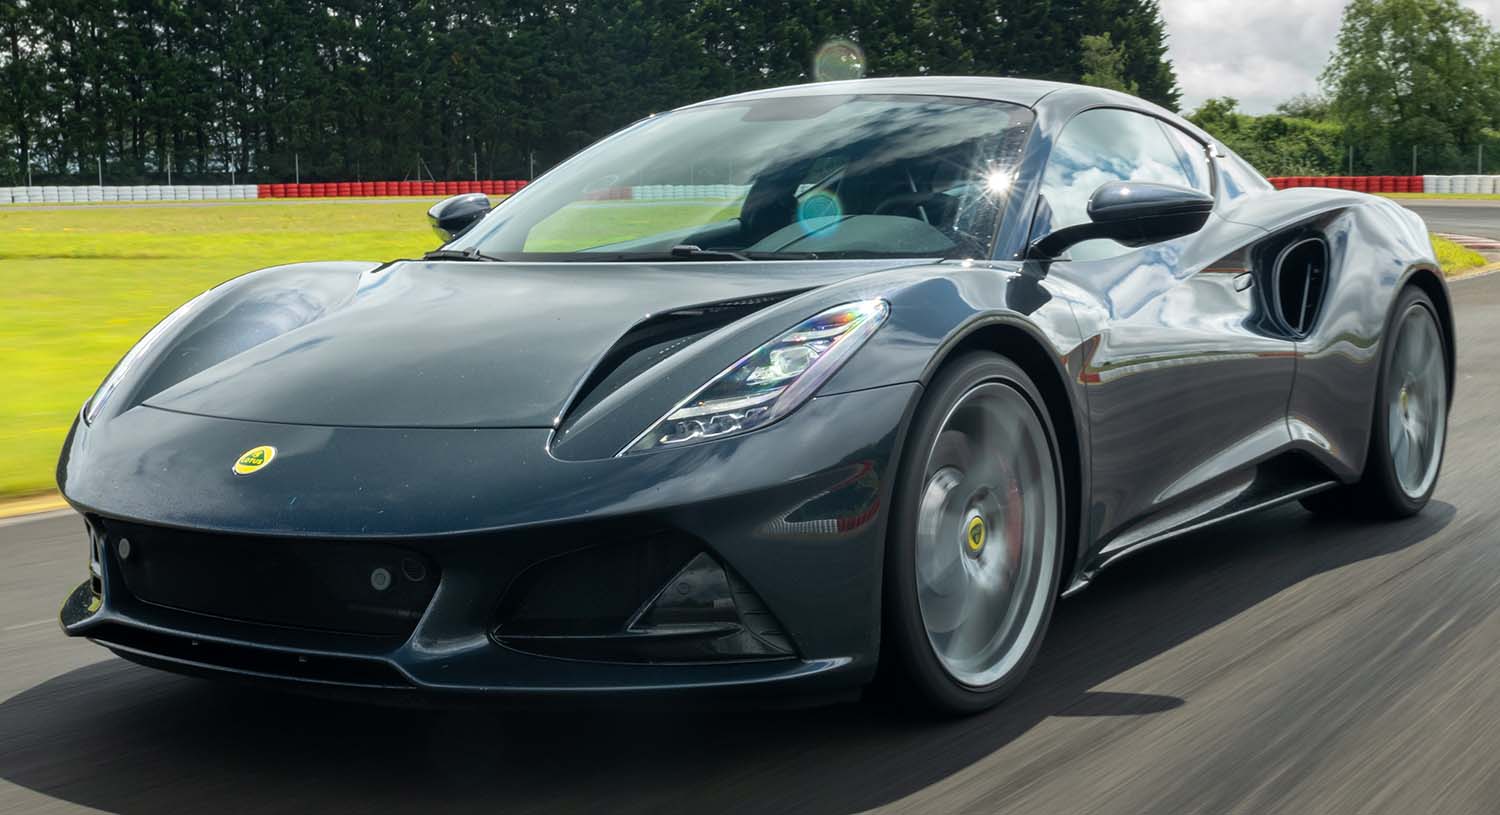 Lotus Emira To Dazzle With Dynamic Debut At This Weekend’s Goodwood Festival Of Speed